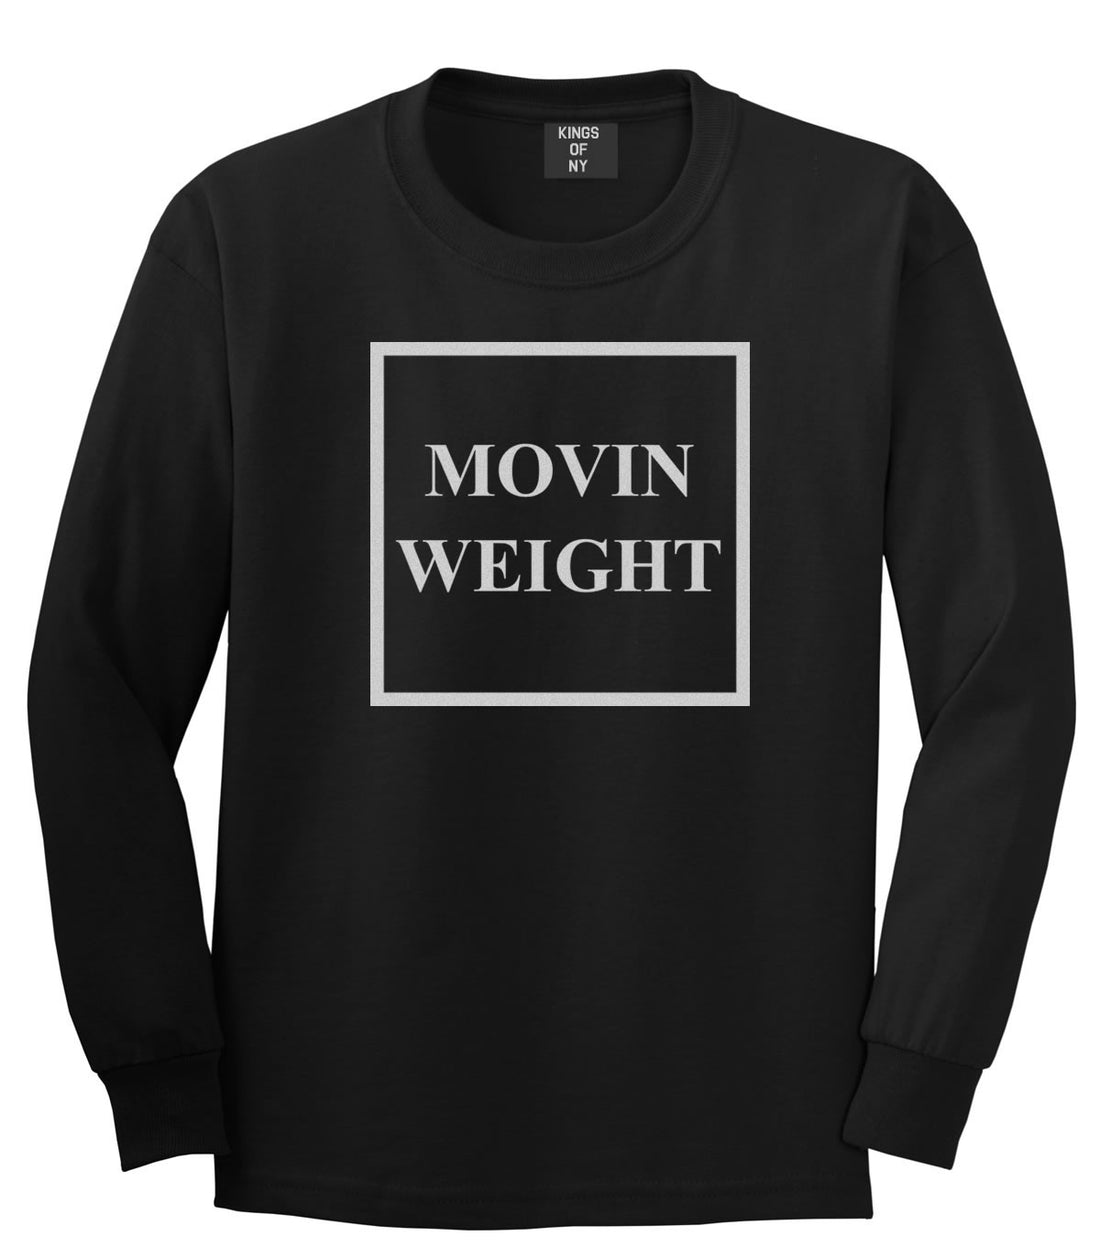 Movin Weight Hustler Boys Kids Long Sleeve T-Shirt in Black by Kings Of NY